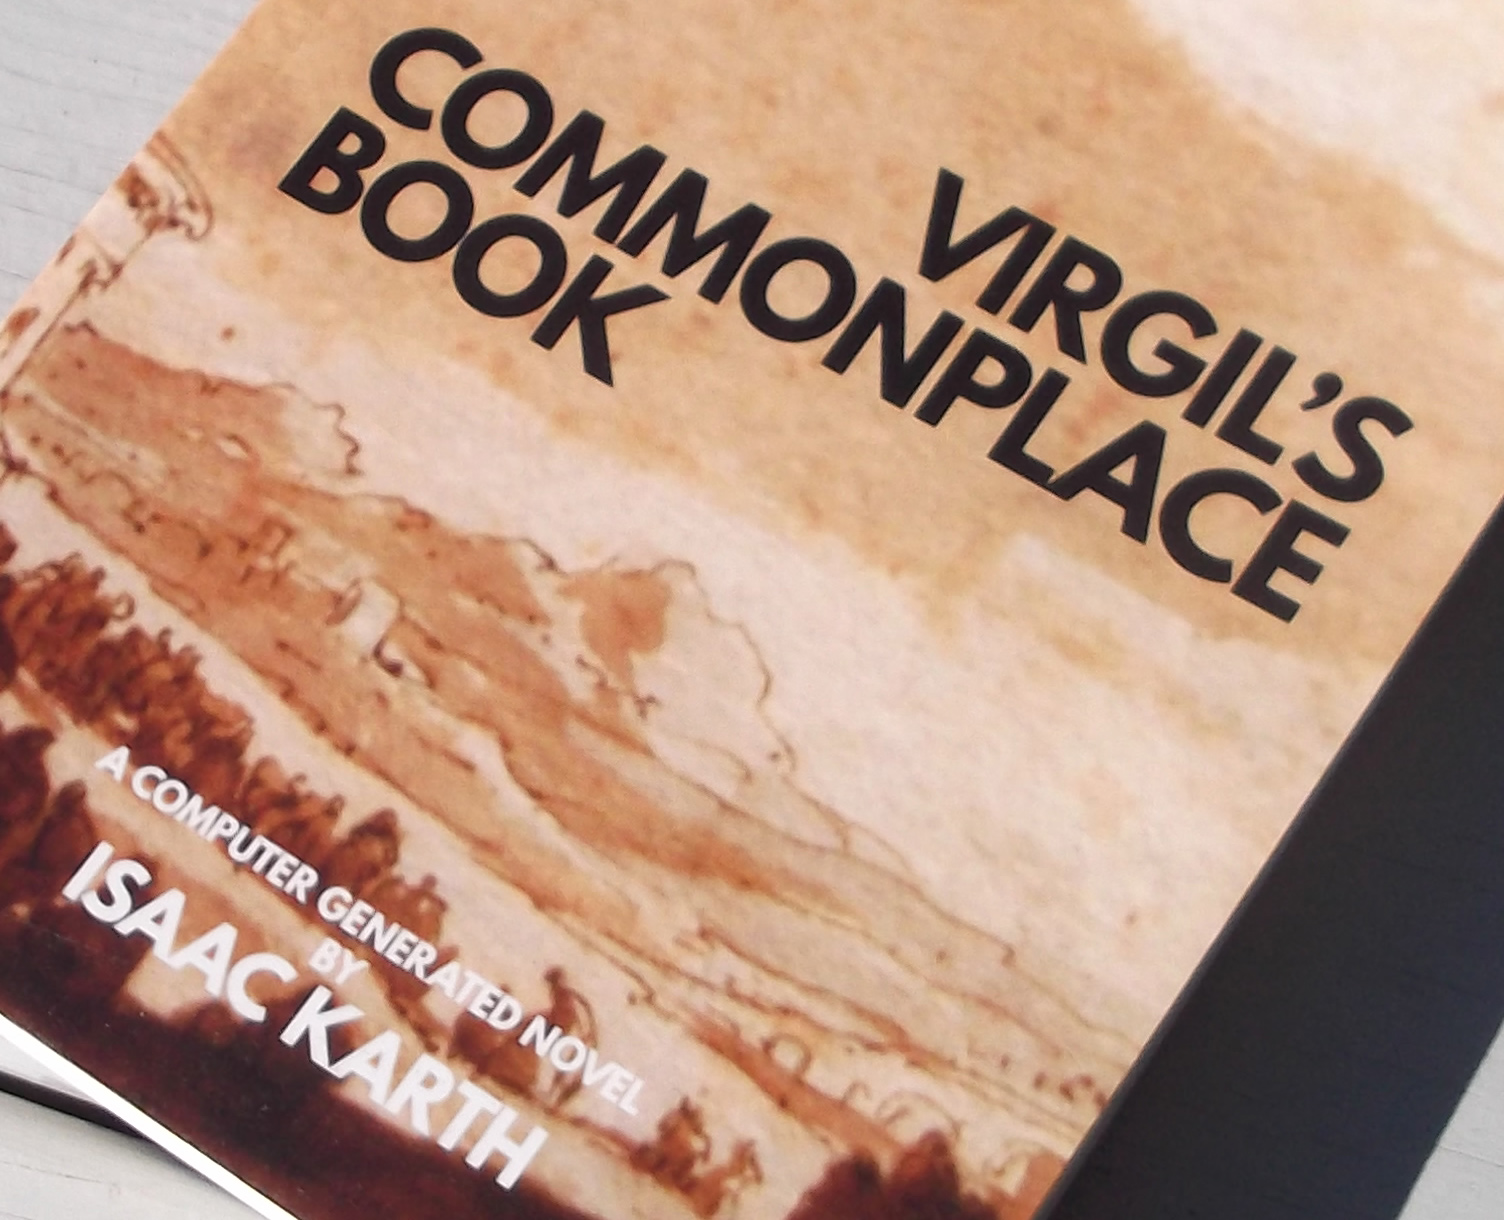 Photo of the cover of Virgil's Commonplace Book